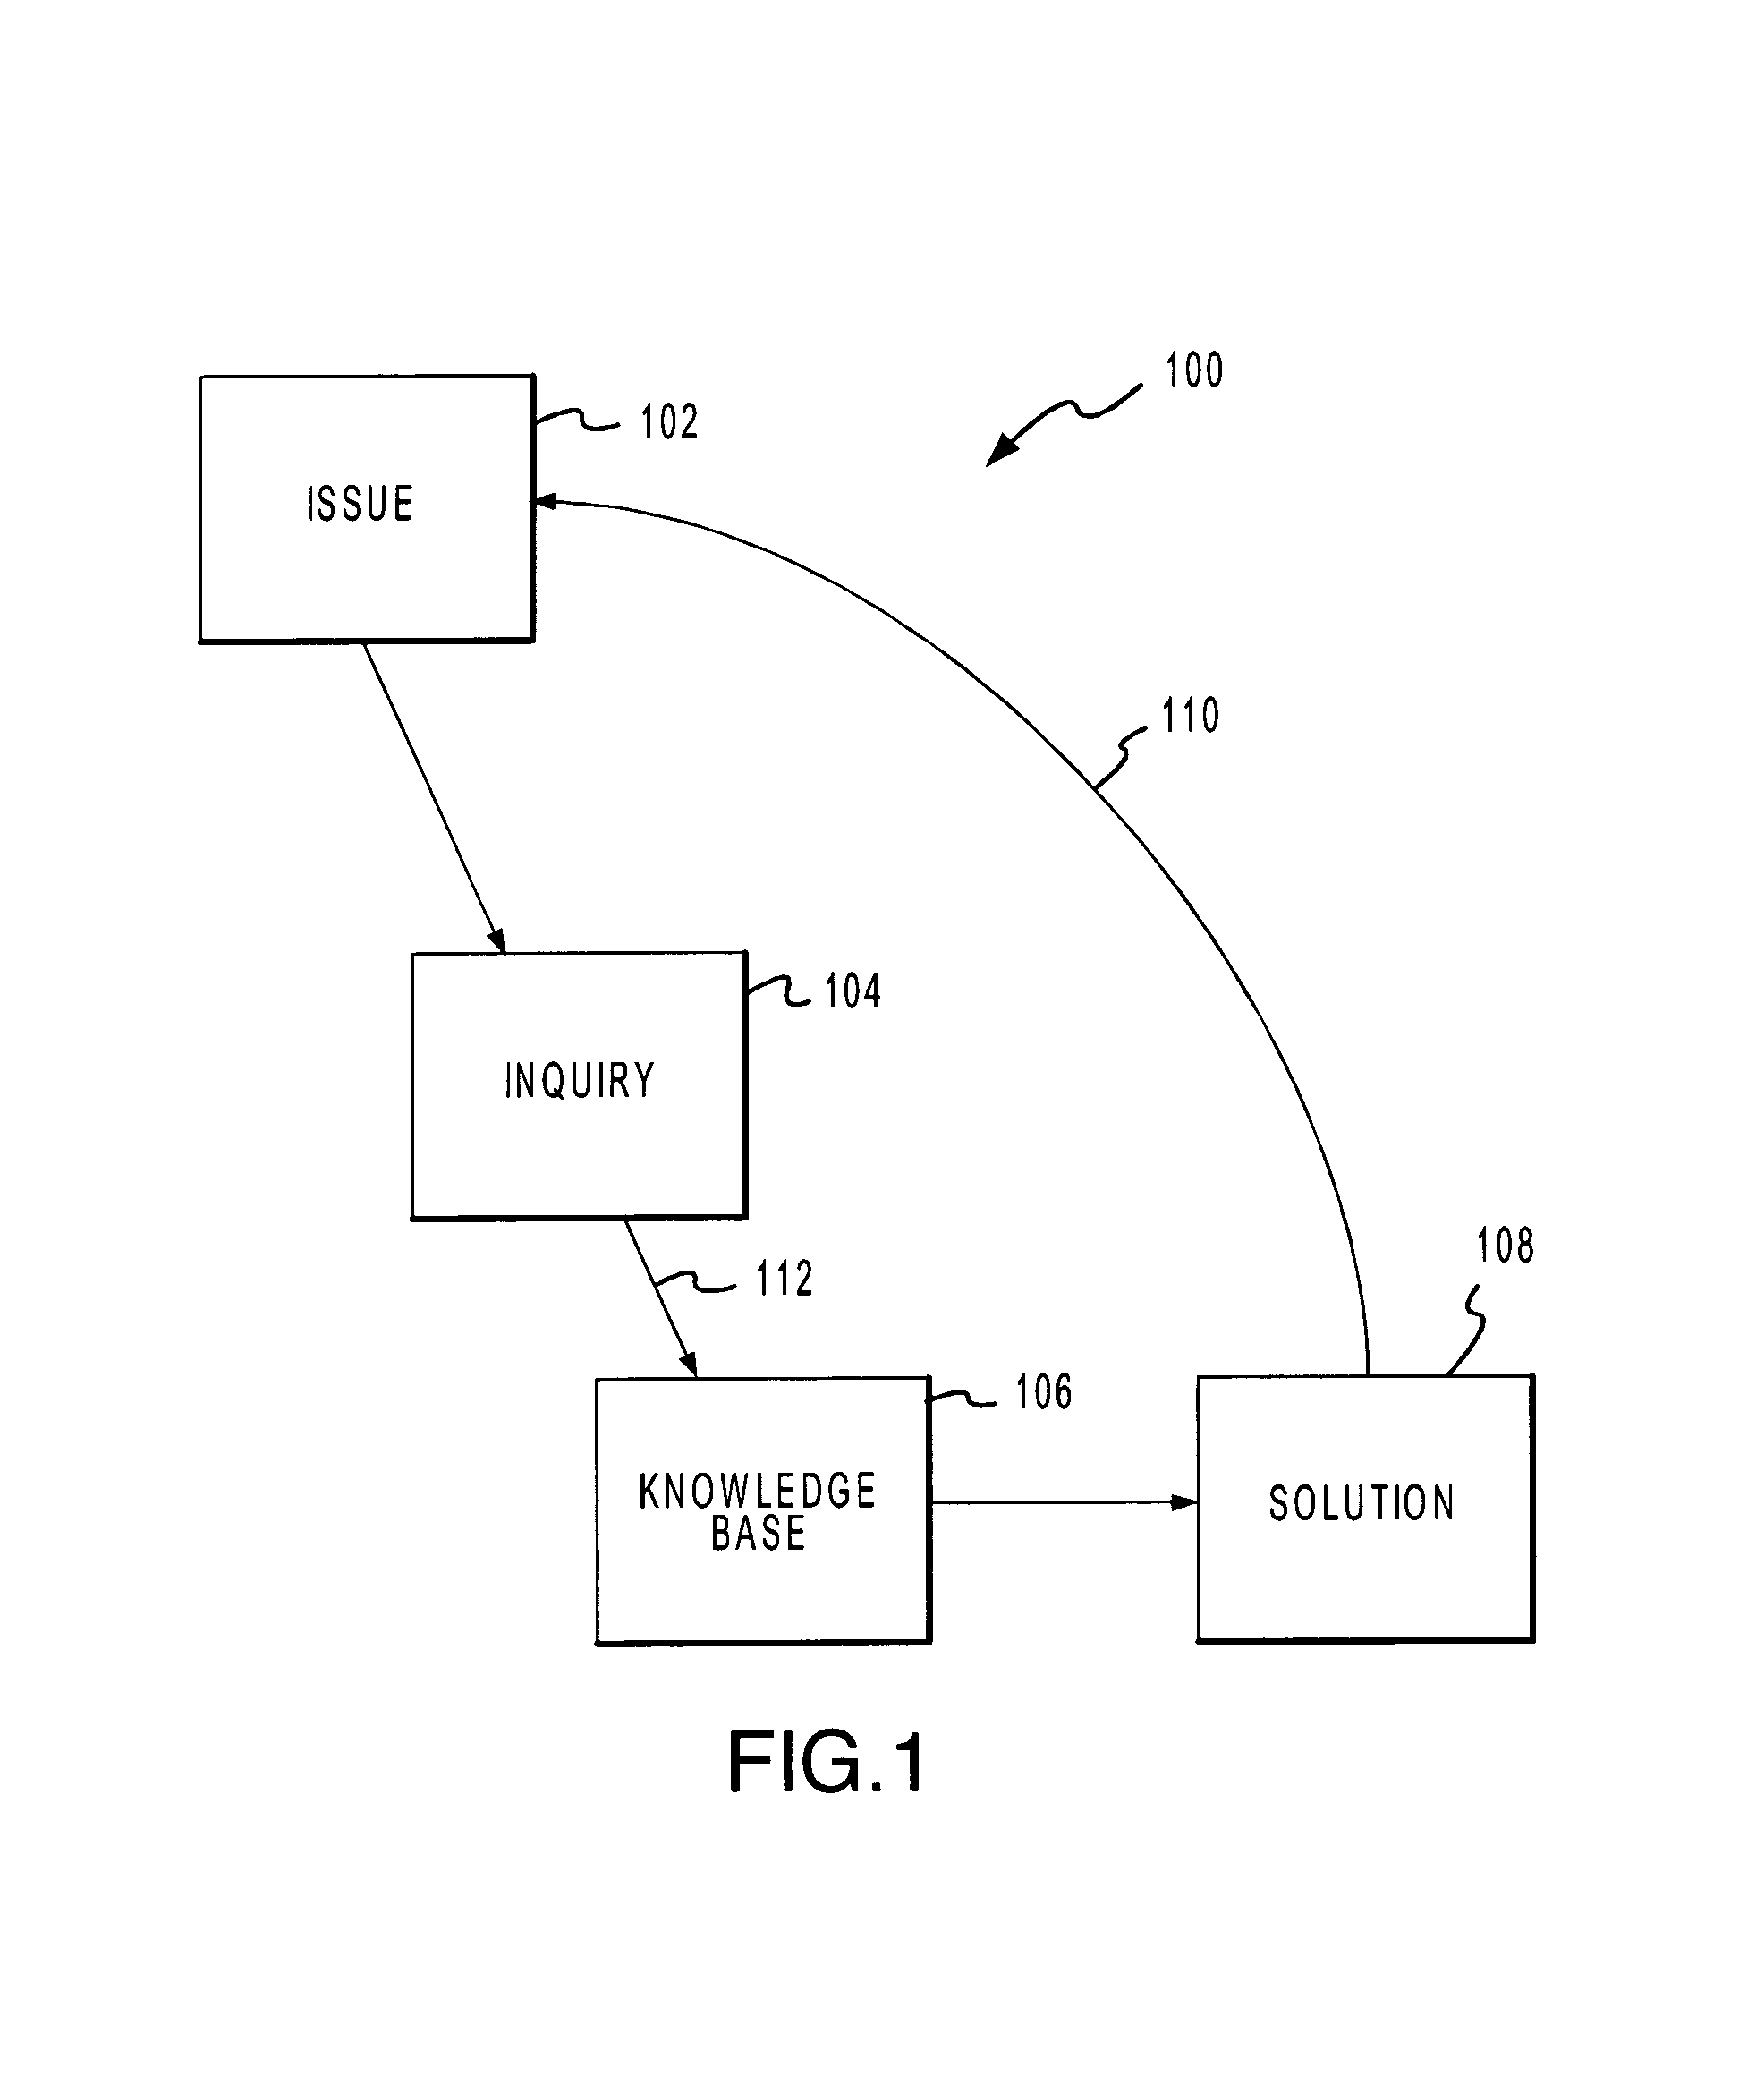 Method and system for ergonomic assessment and reduction of workplace injuries